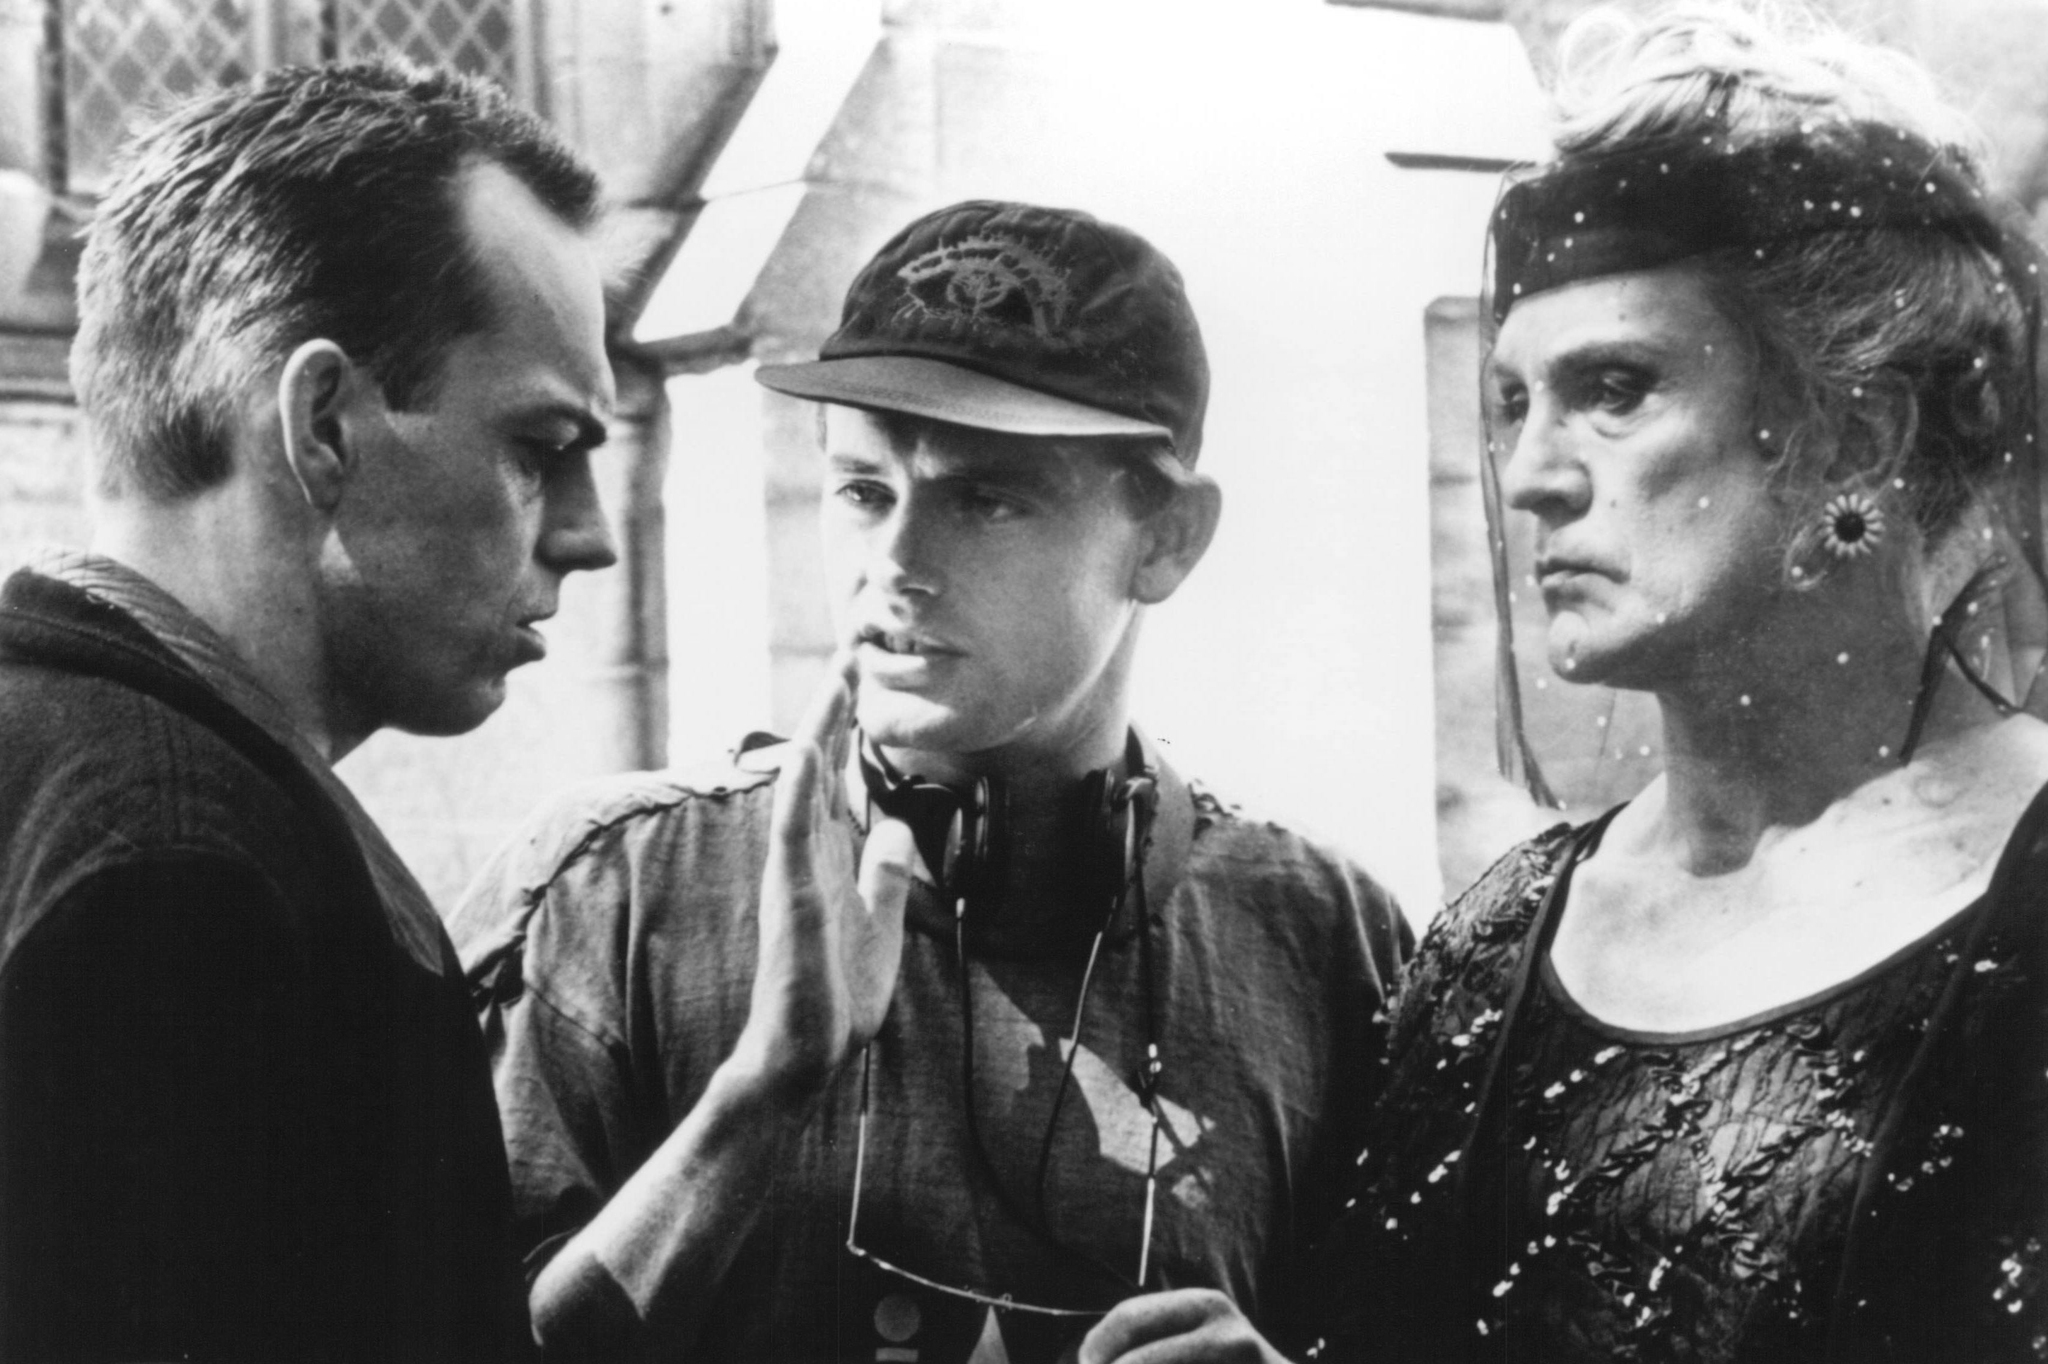 Still of Terence Stamp and Hugo Weaving in The Adventures of Priscilla, Queen of the Desert (1994)